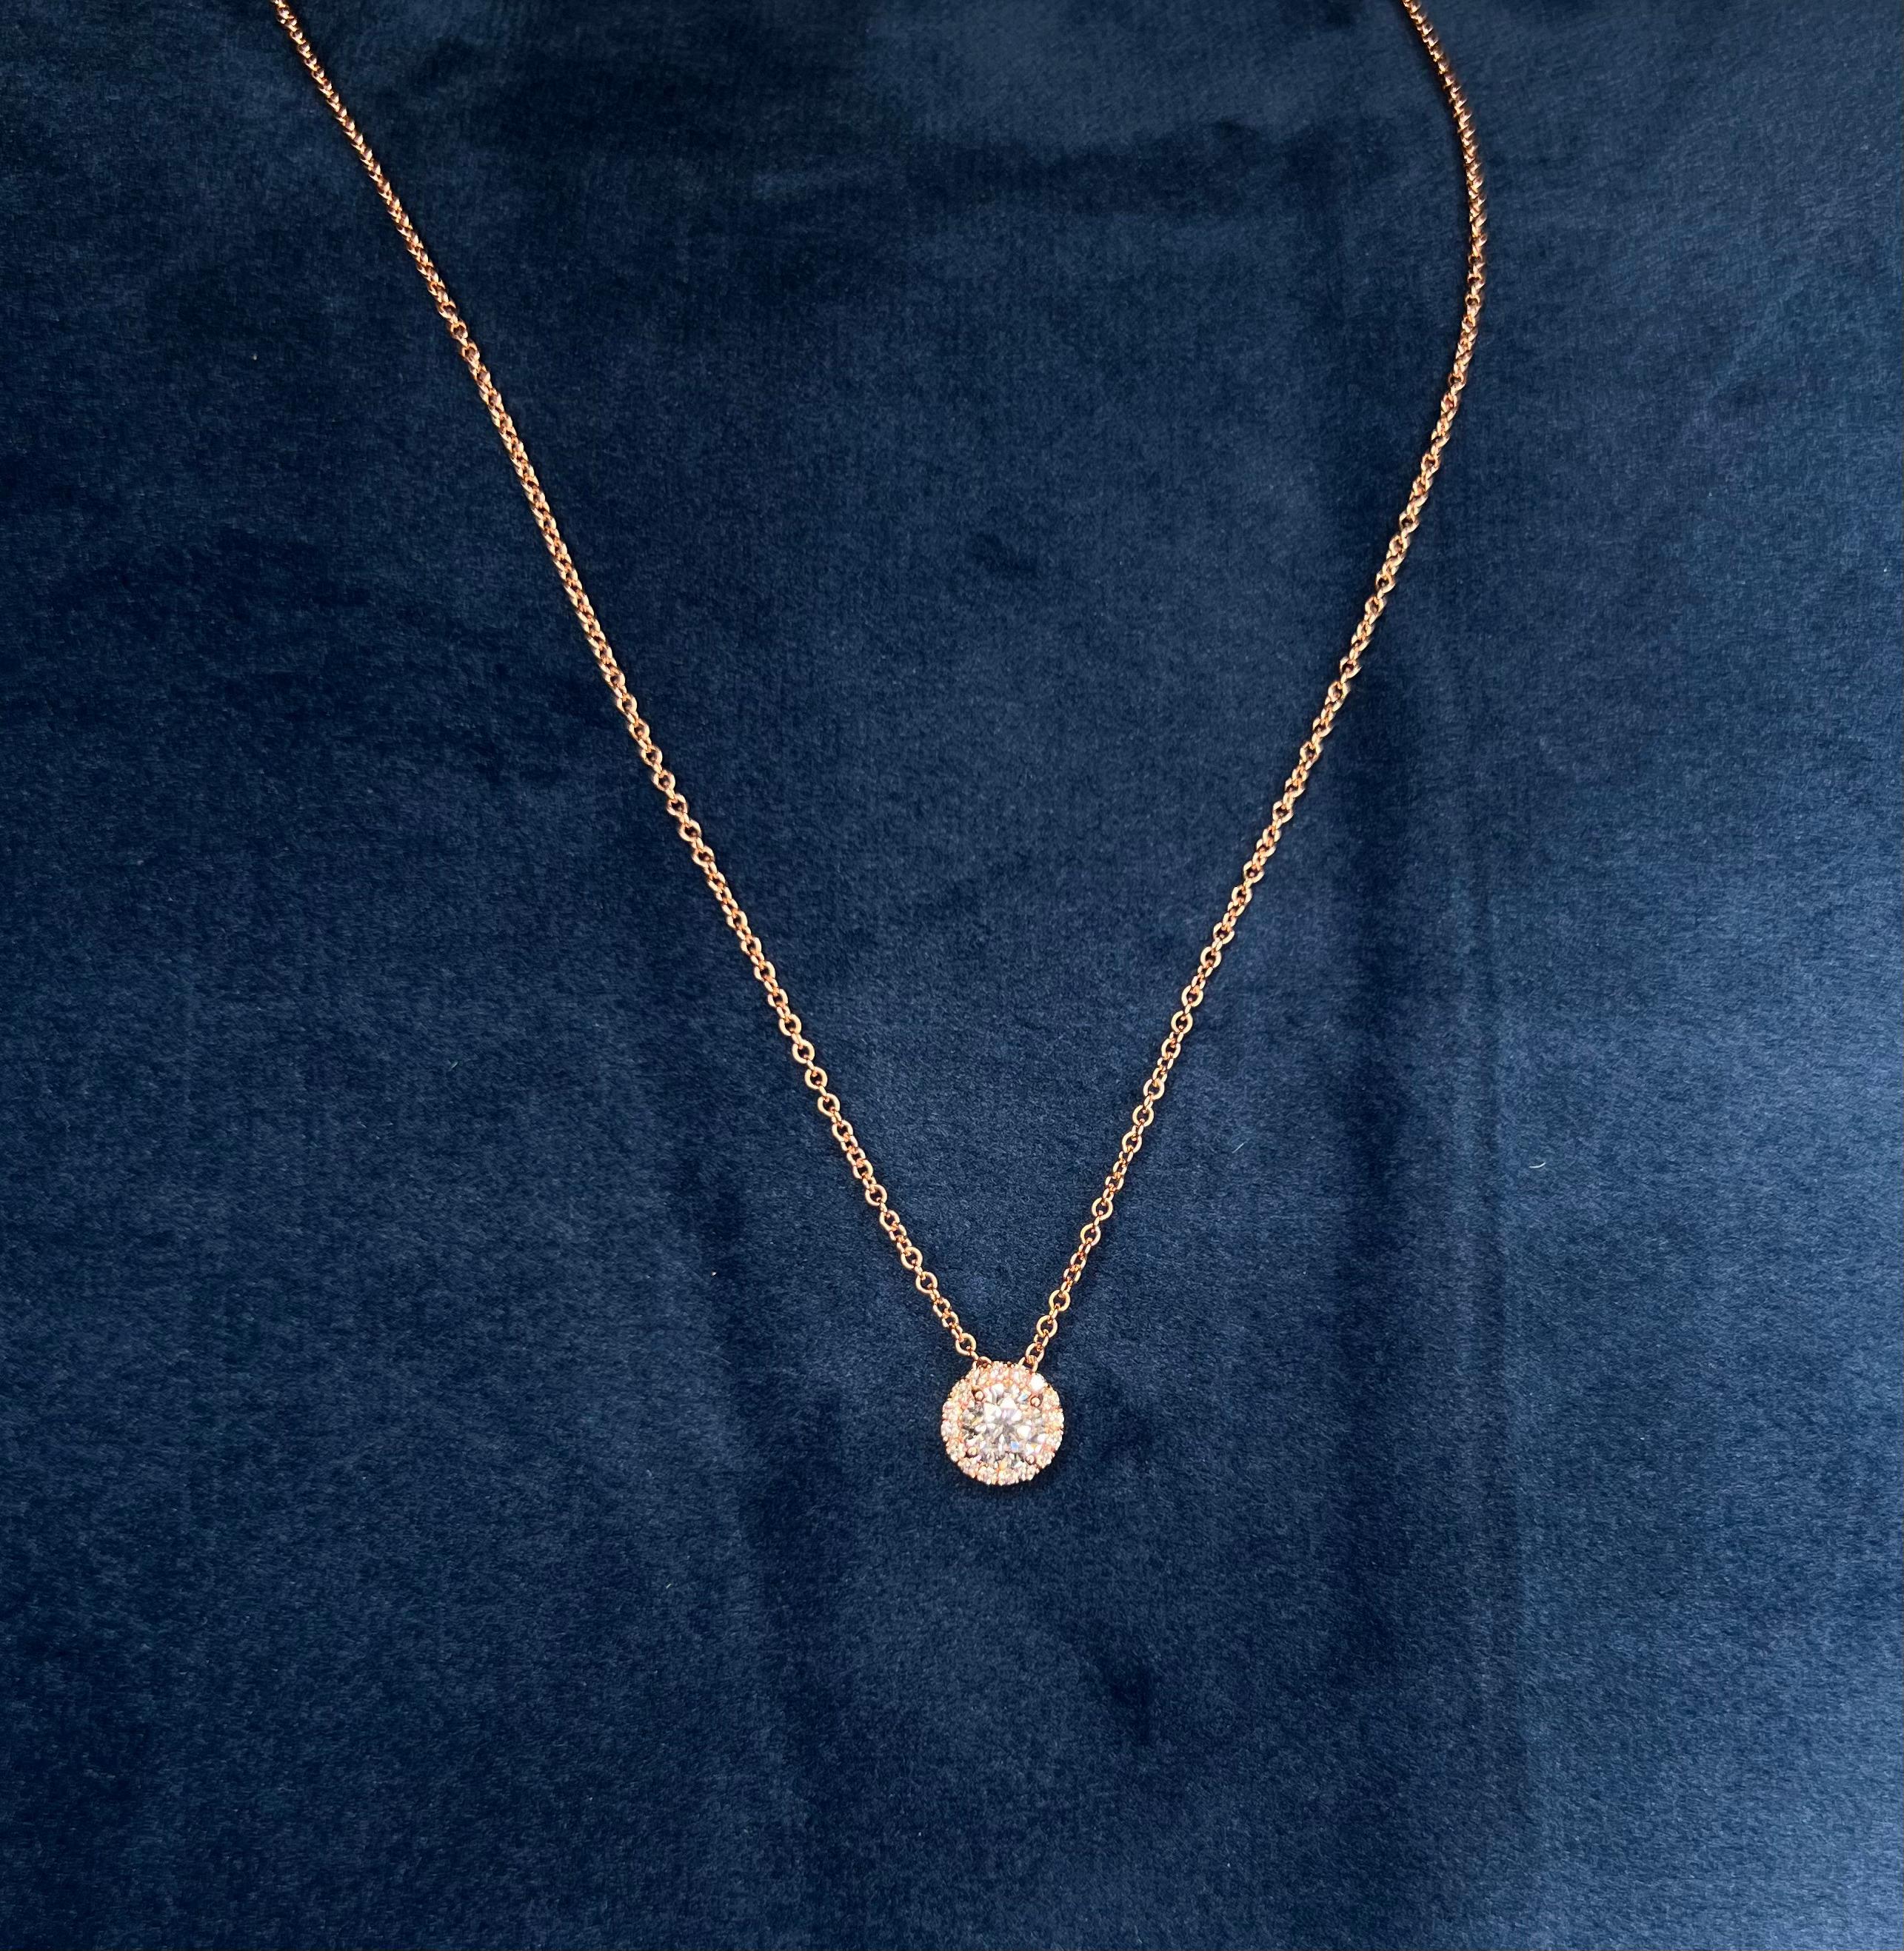 22 Inch 14k Yellow Gold 0.65 Carat Round Cut Diamond Solitaire Pendant Necklace In New Condition For Sale In Los Angeles, CA